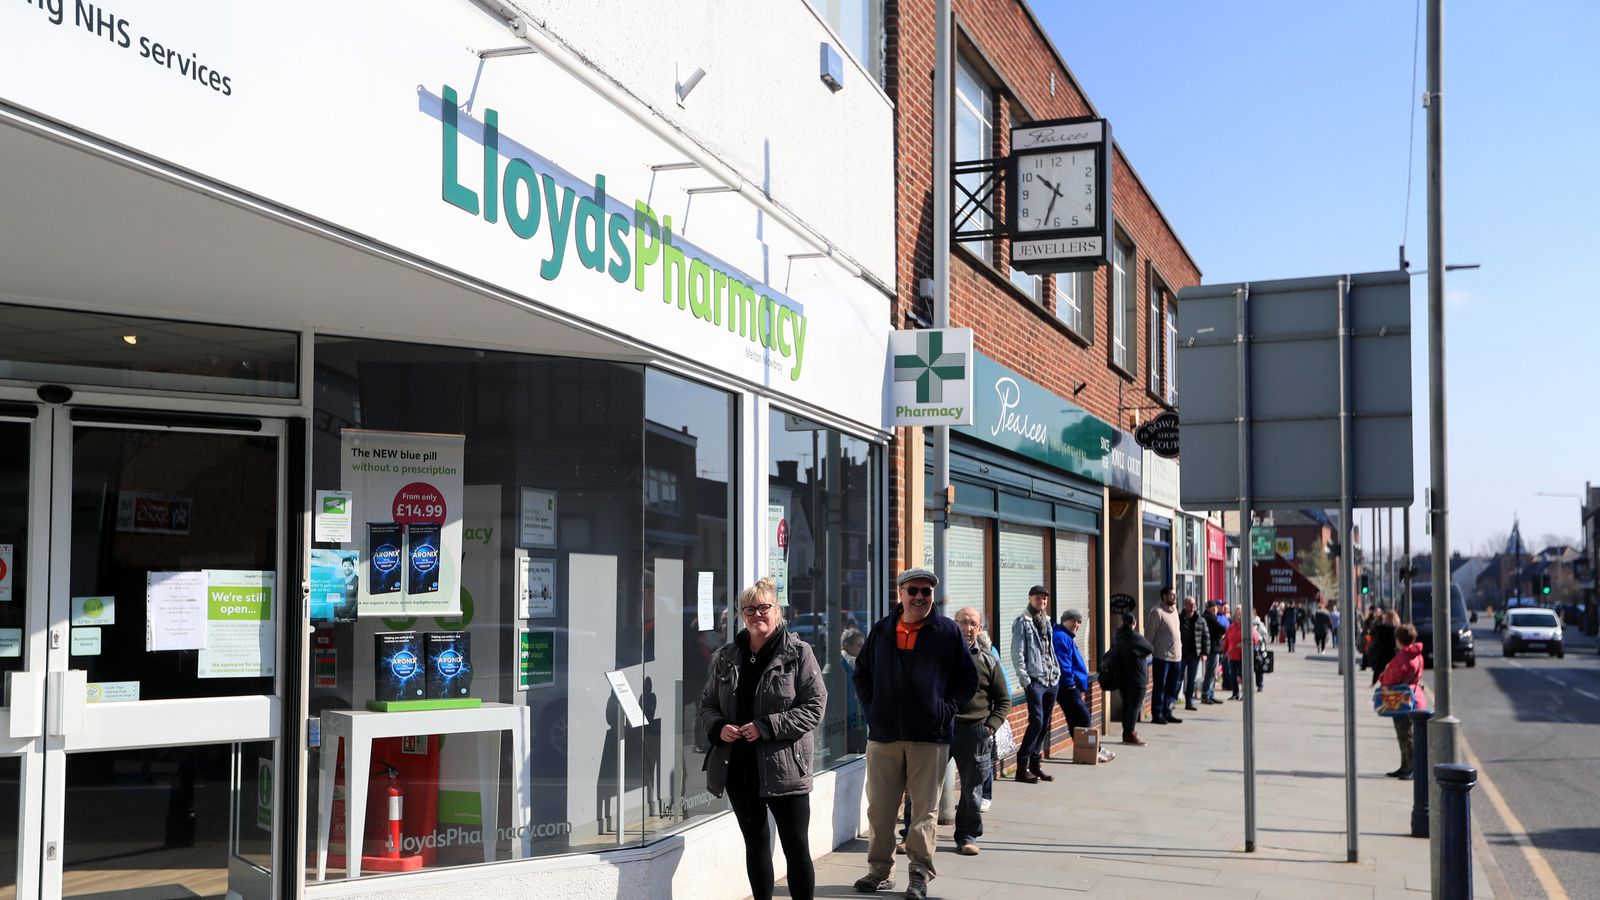 Lloyds Pharmacy to close all Sainsbury's branches putting 2,000 jobs at risk